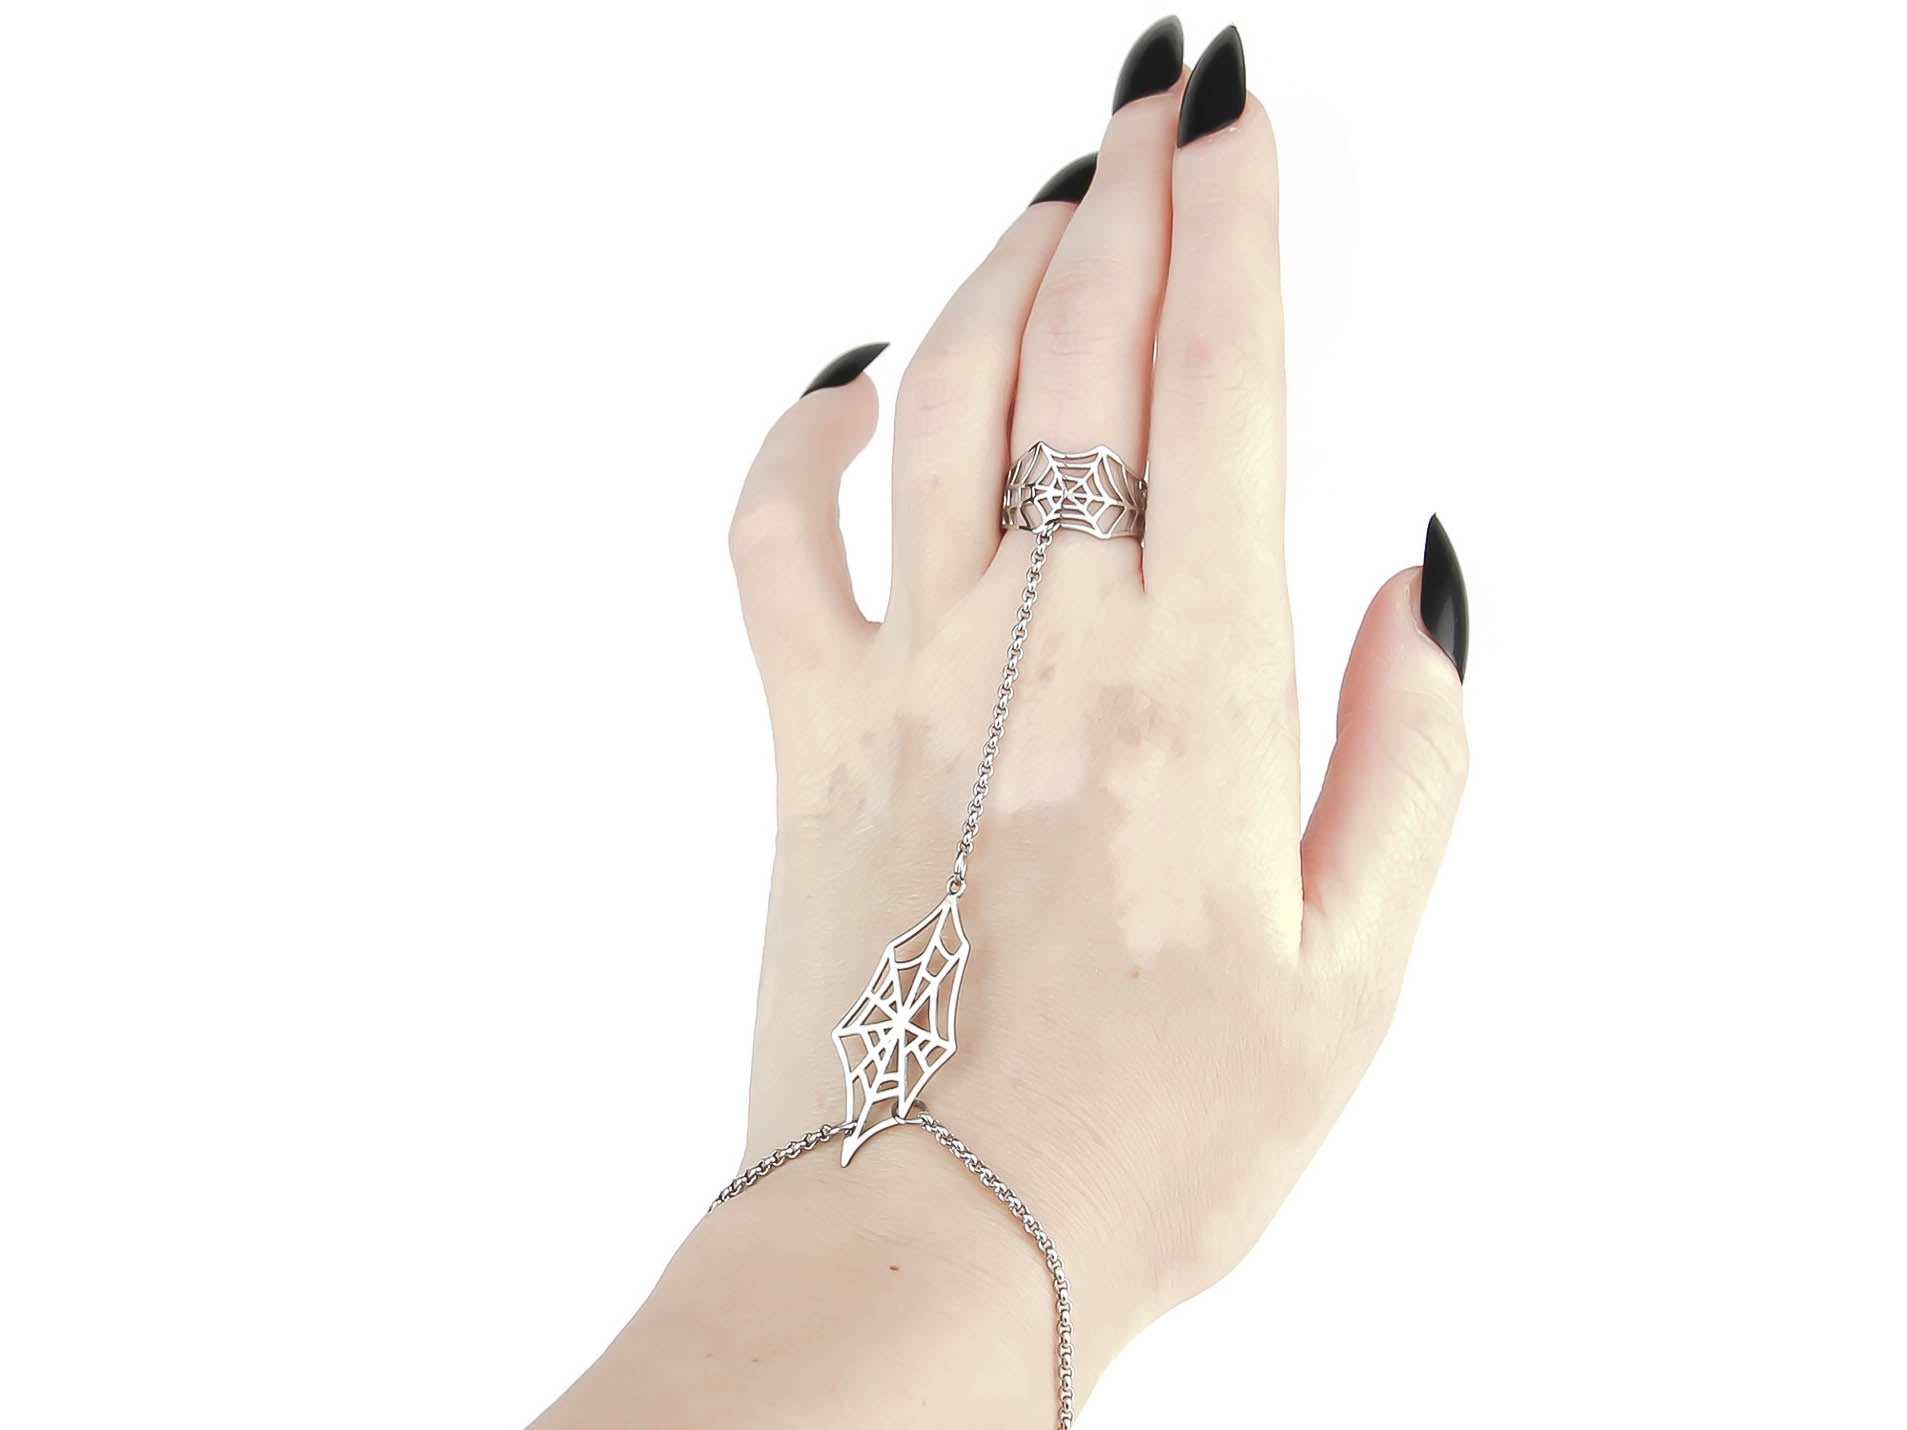 A graceful hand chain bracelet ring from Myril Jewels, designed with a spiderweb motif, adorns the wrist and finger of a hand with polished black nails. This neo-goth jewelry piece is a fusion of dark-avantgarde elegance and gothic-chic, perfect for Halloween and everyday wear. The silver spiderweb design bridges the gap between punk jewelry and whimsigoth aesthetics, making it a versatile accessory for witchcore followers or as a distinctive touch to rave party and festival outfits